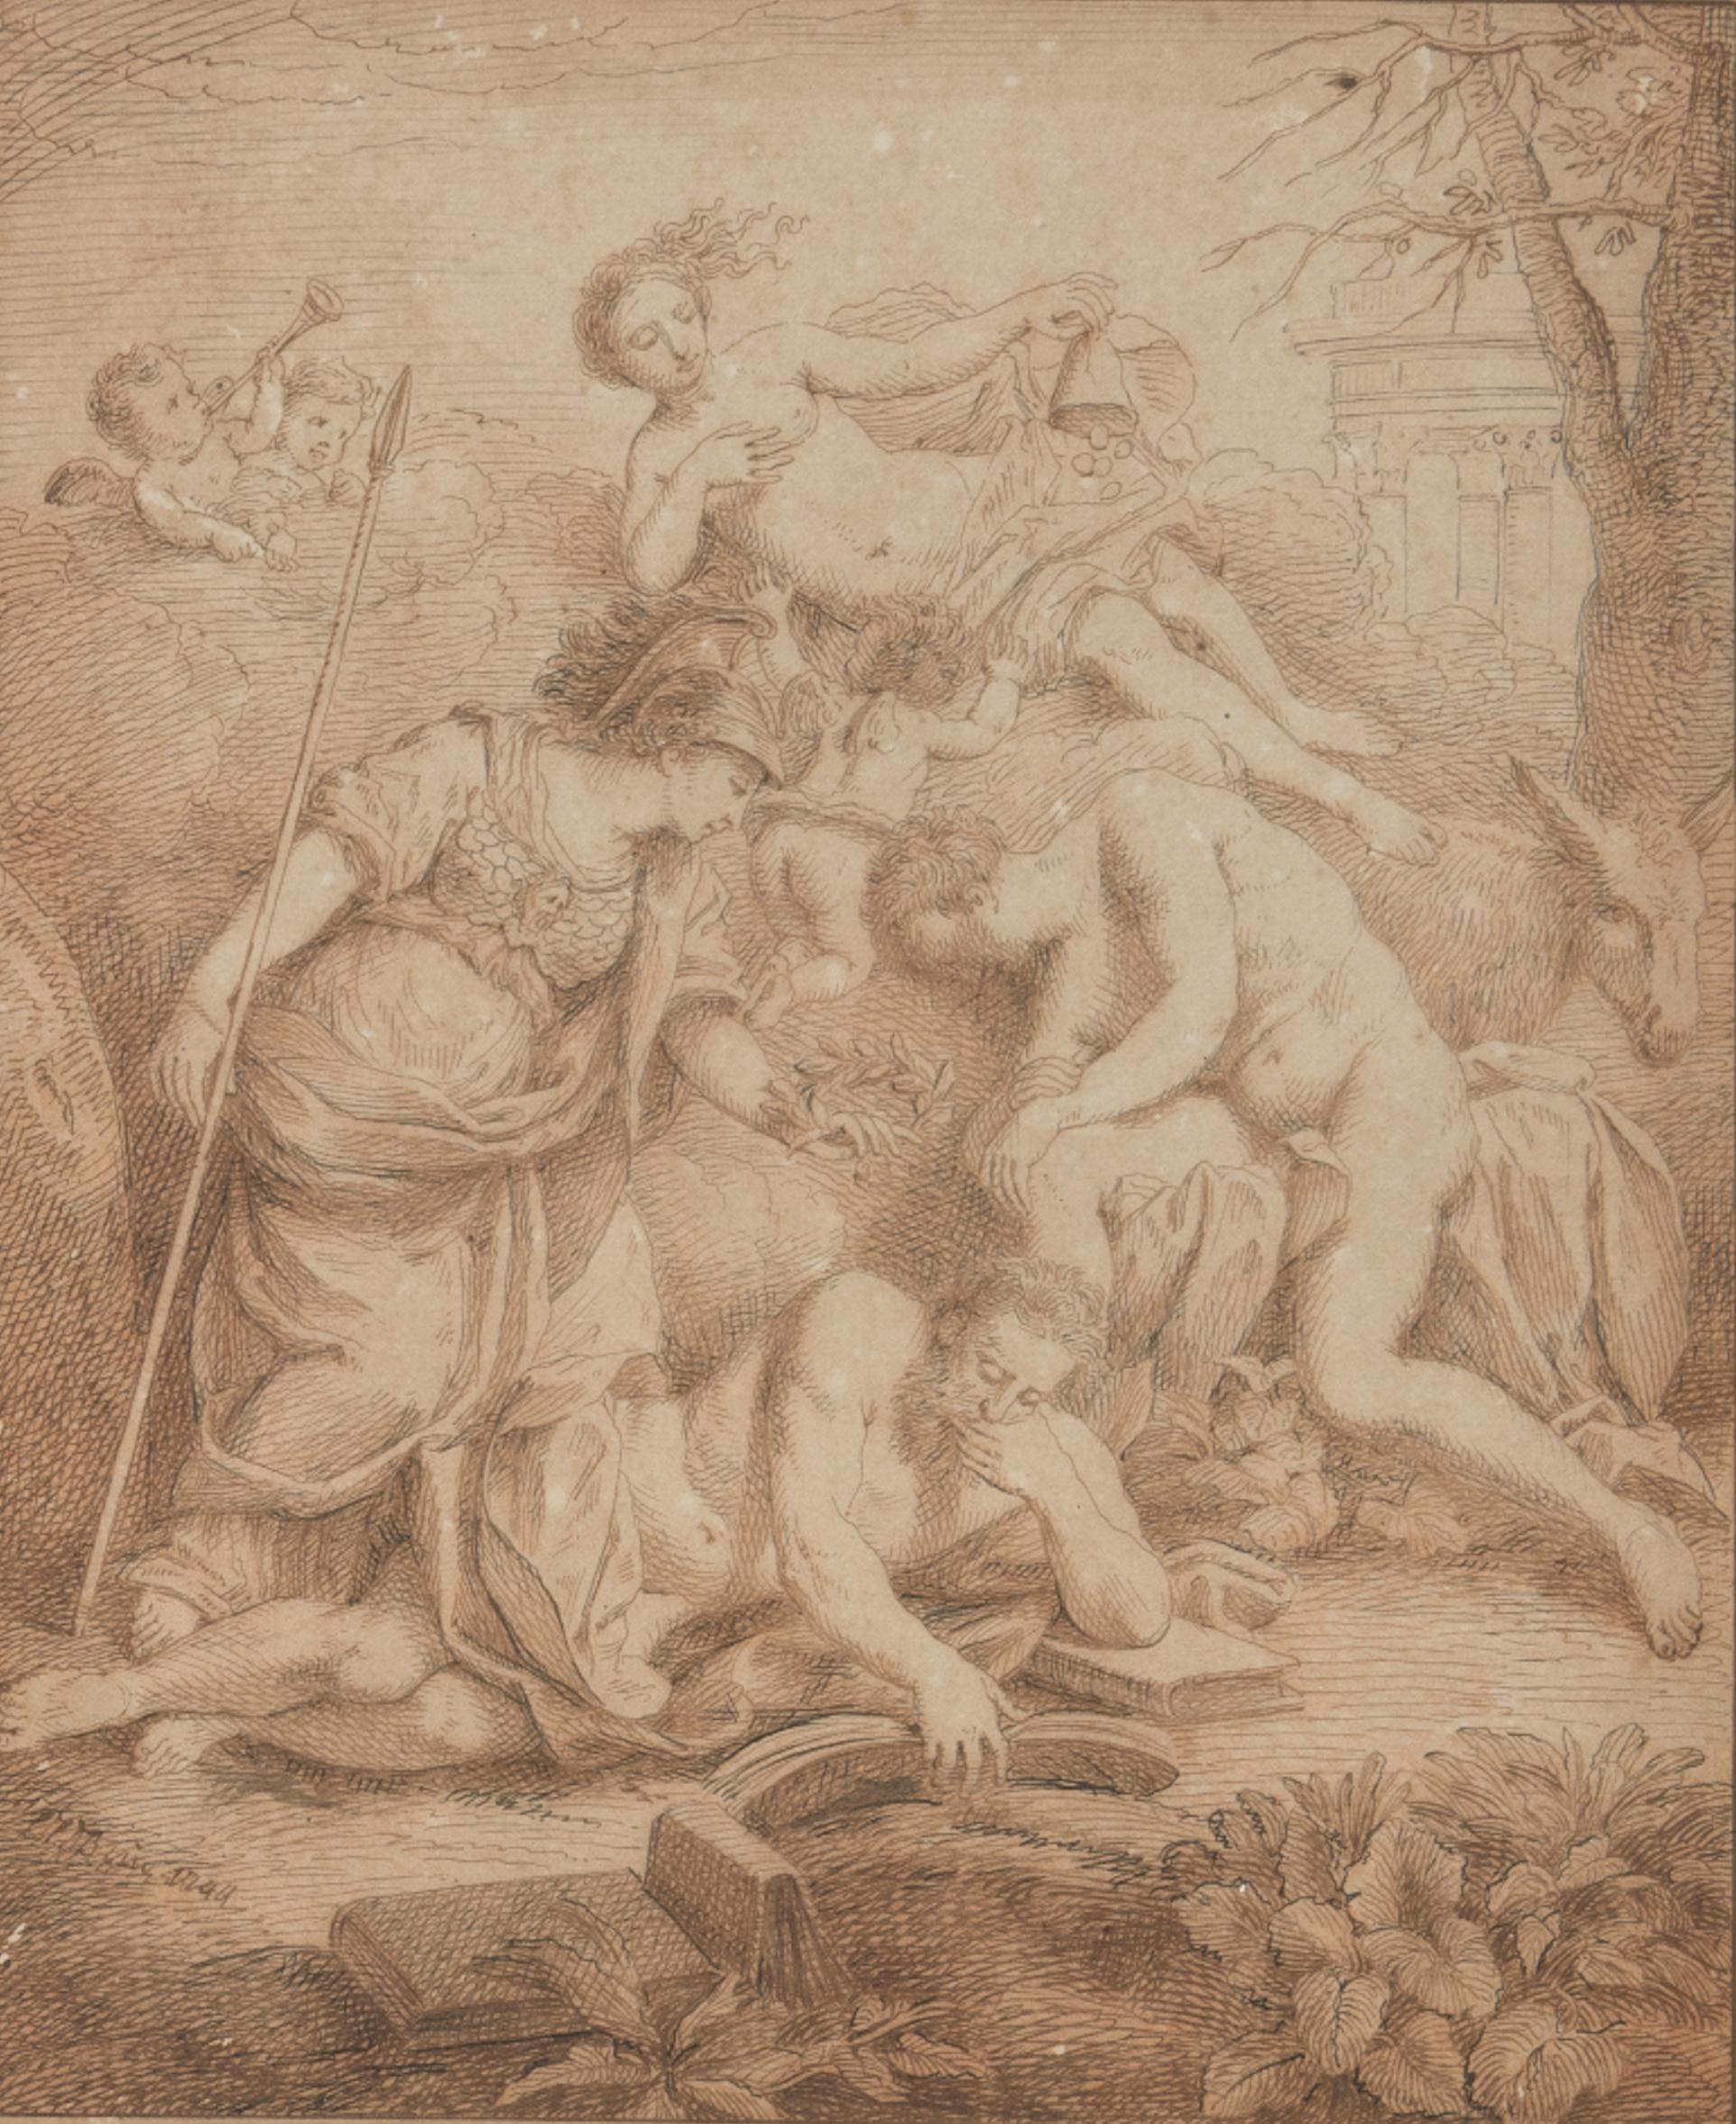 Louis Fabricius Dubourg (attr.) Figurative Art - Allegorical Scene - Sepia Drawing Attribute to L.F. Dubourg -Early 1700